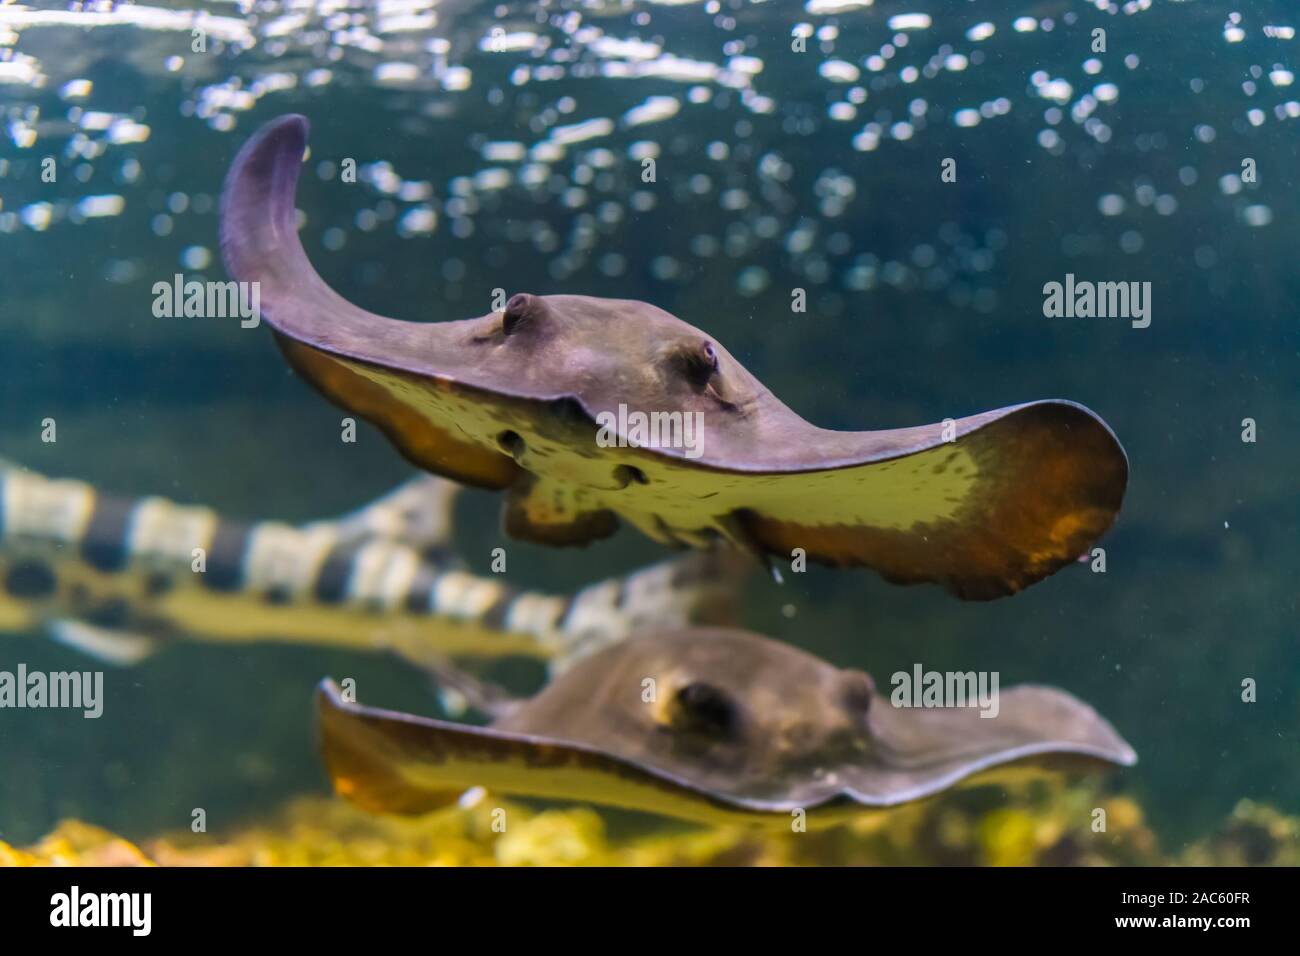 front closeup of a common stingray swimming underwater, popular tropical fish specie from the Atlantic ocean Stock Photo